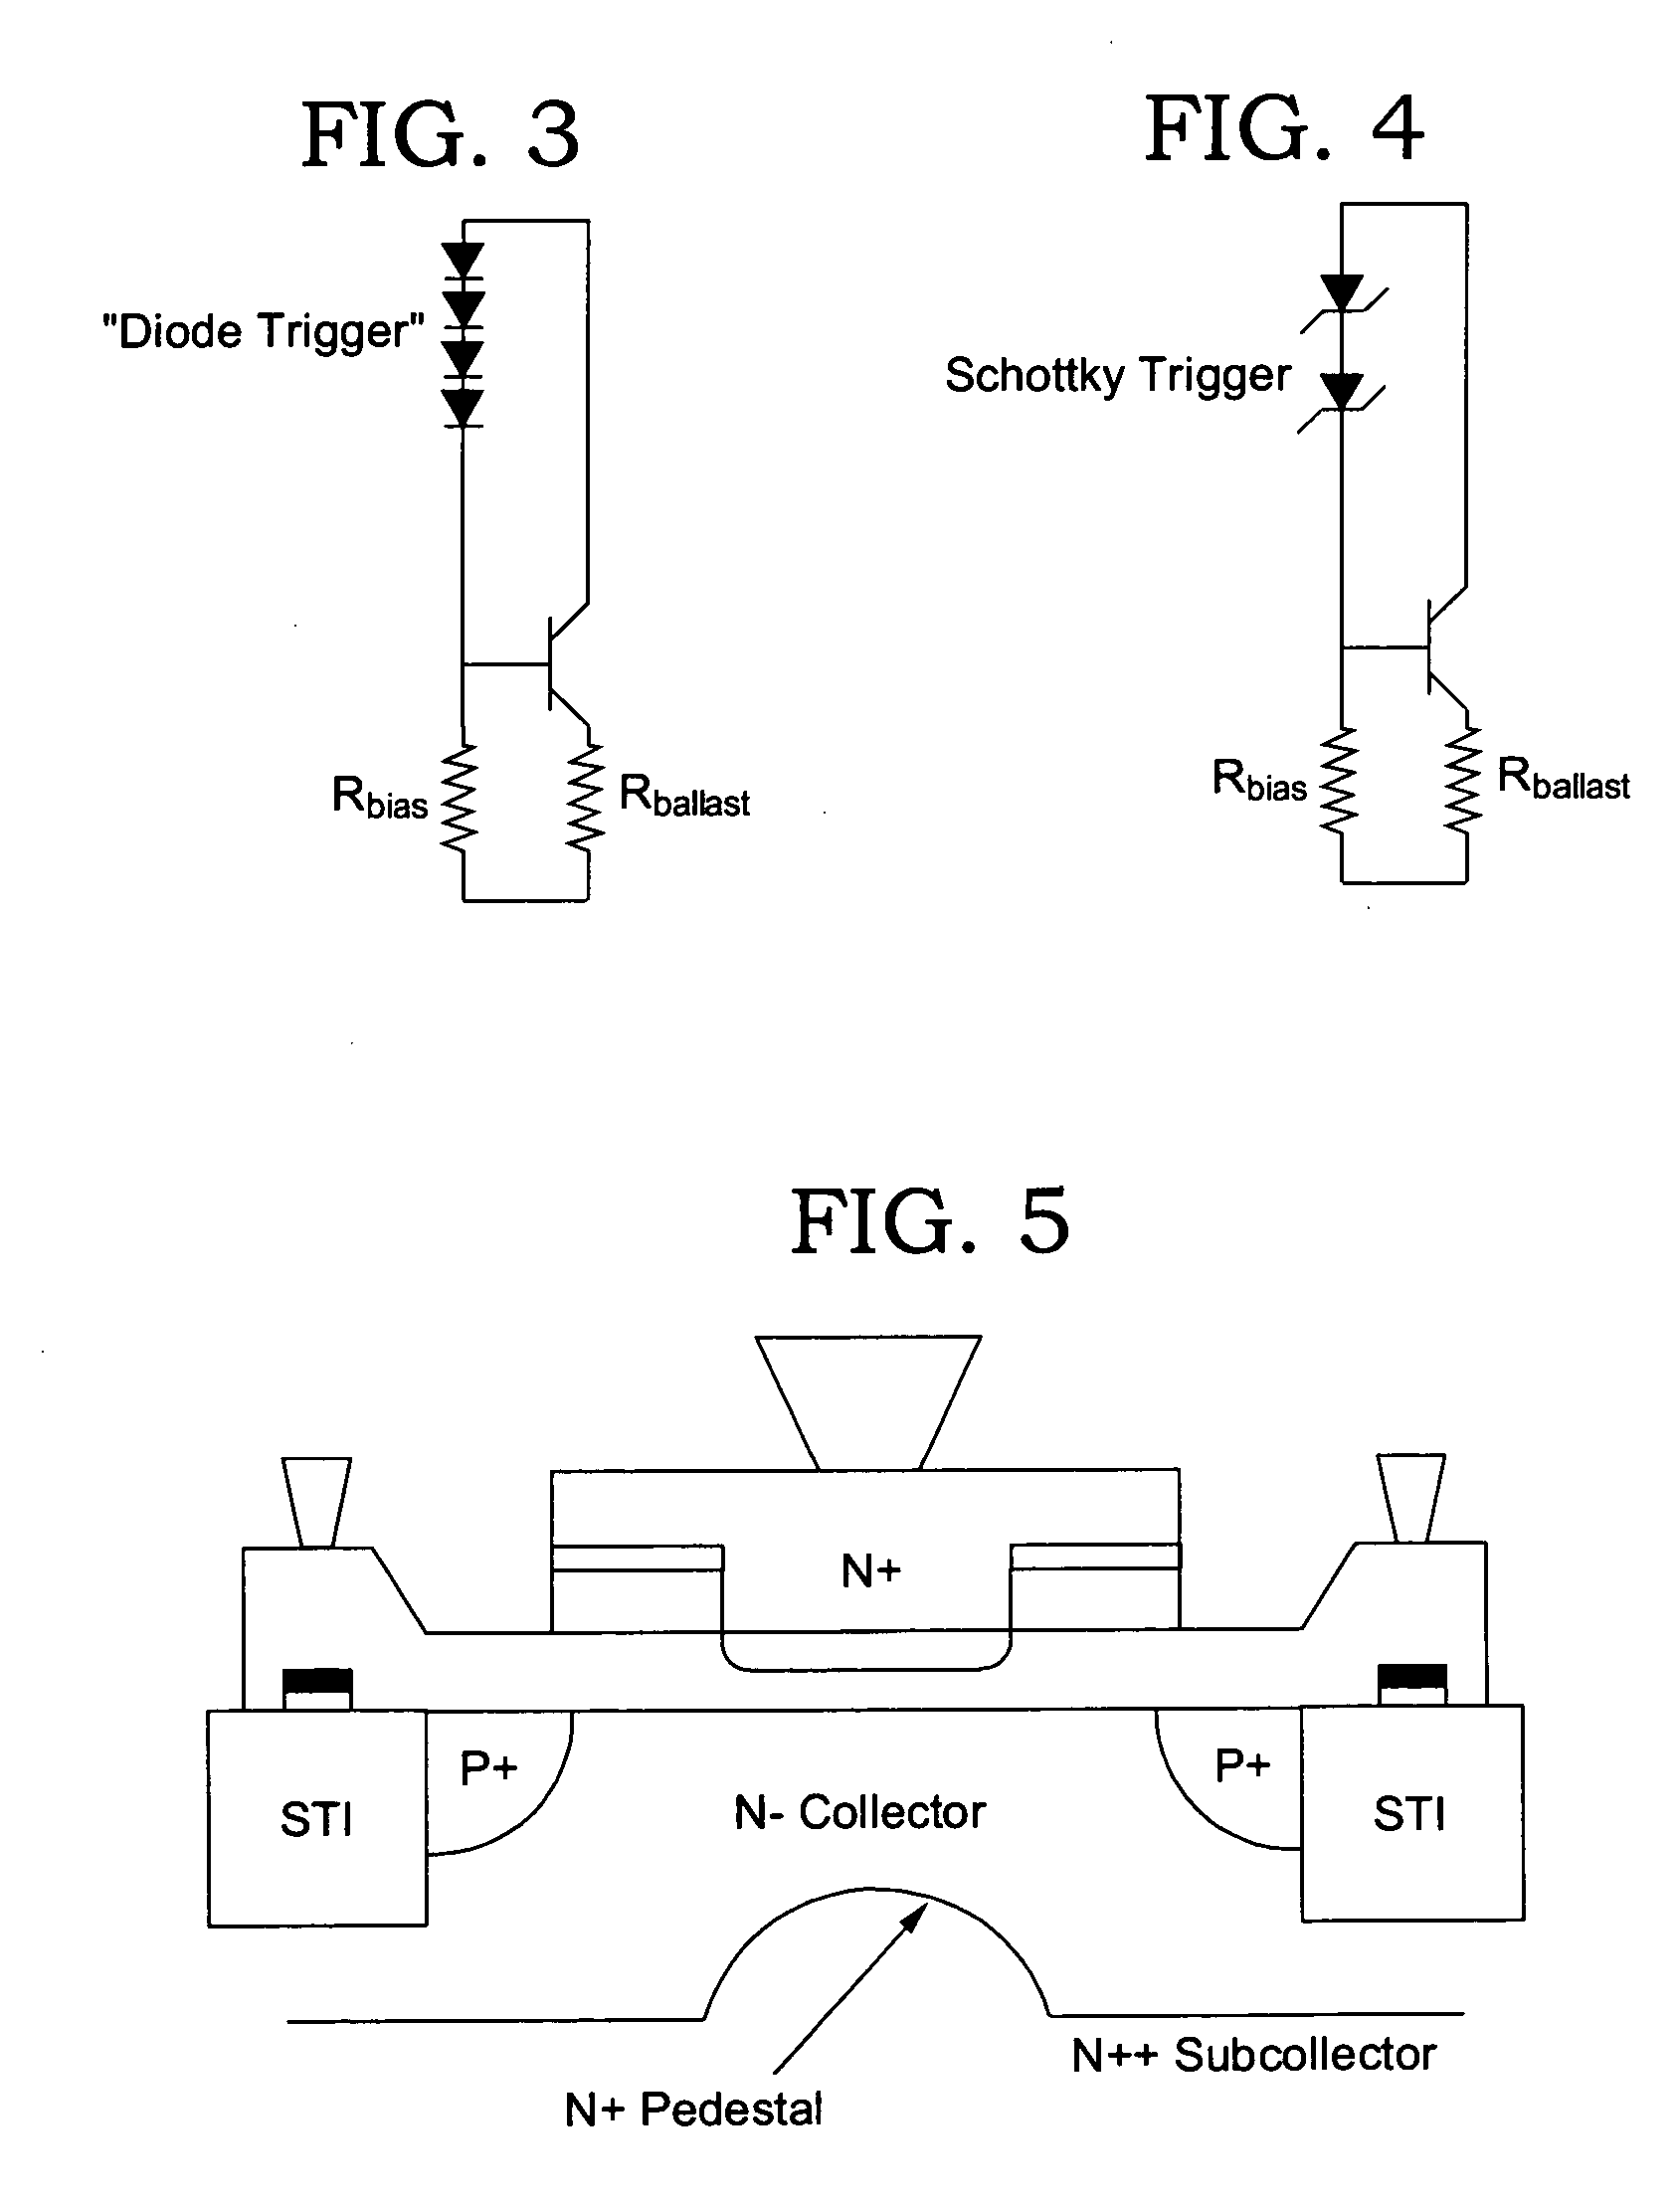 Electrostatic discharge input and power clamp circuit for high cutoff frequency technology radio frequency (RF) applications